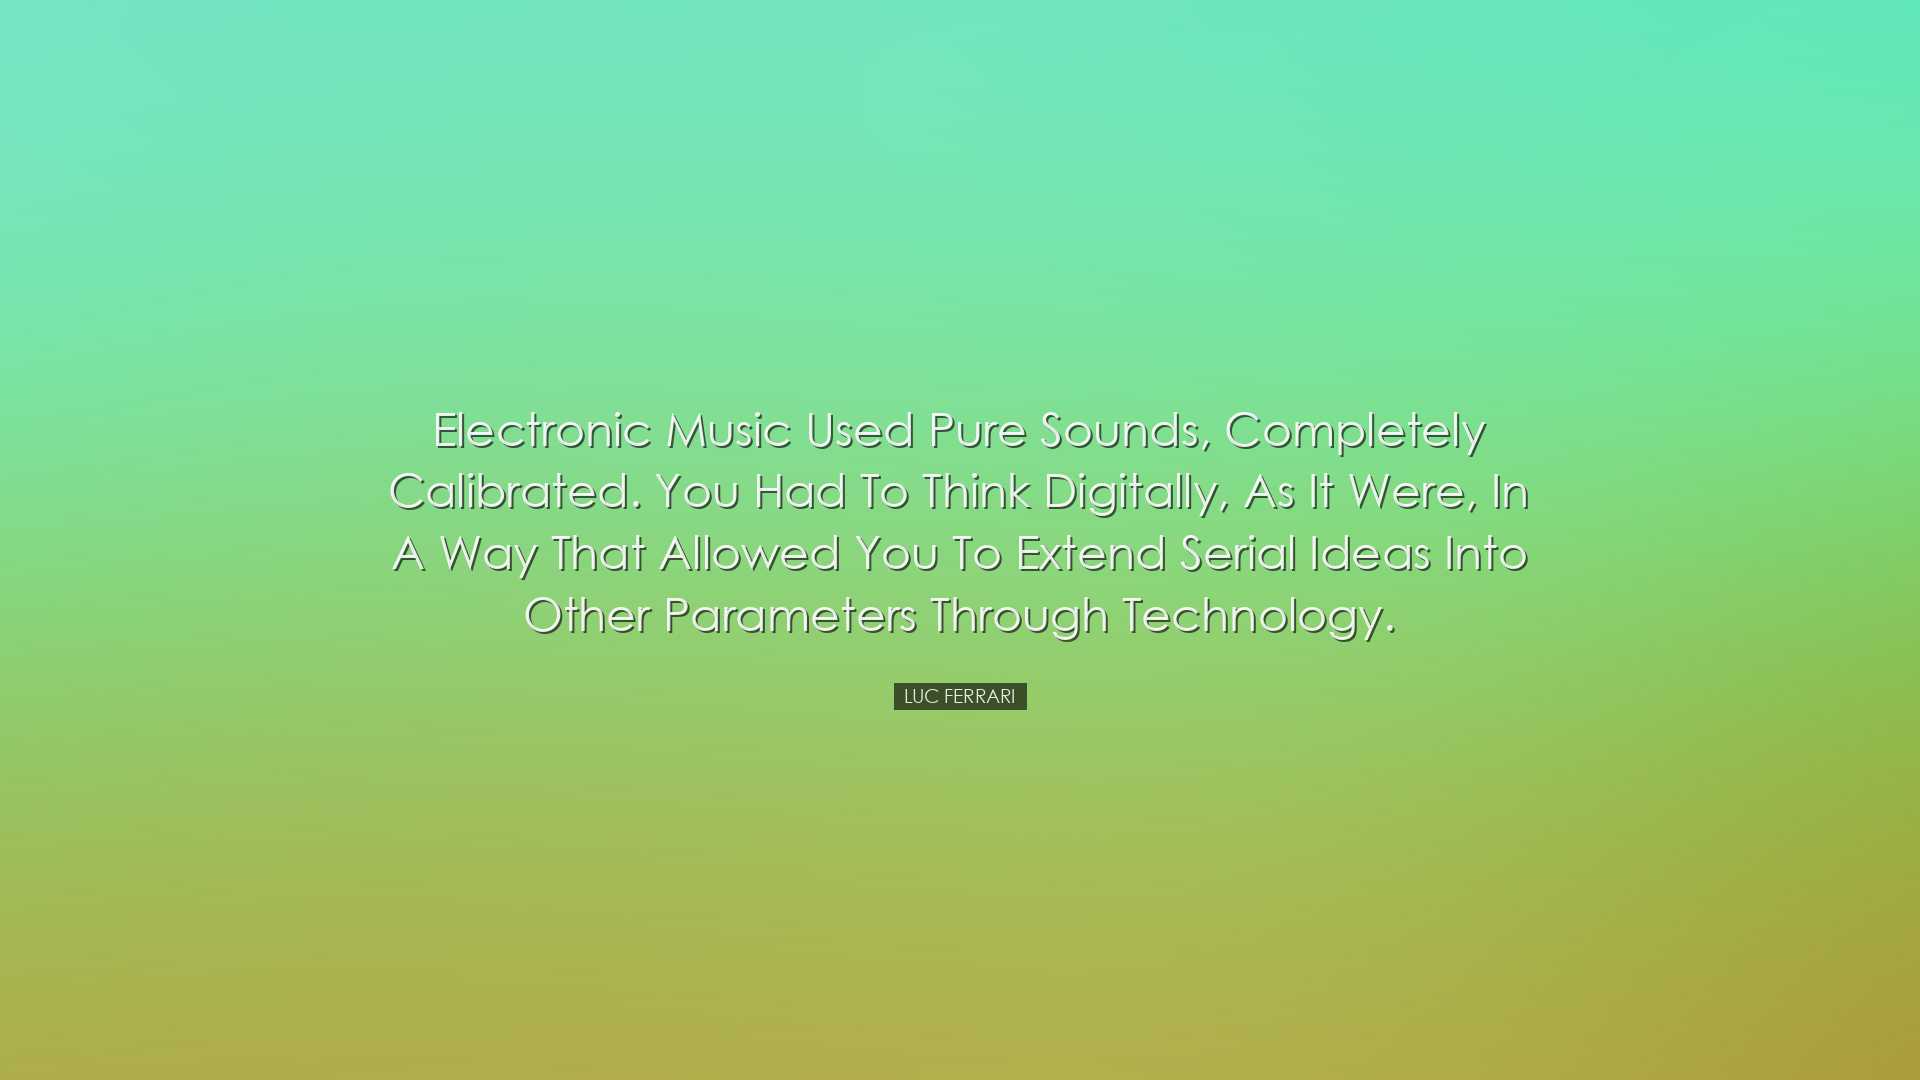 Electronic music used pure sounds, completely calibrated. You had